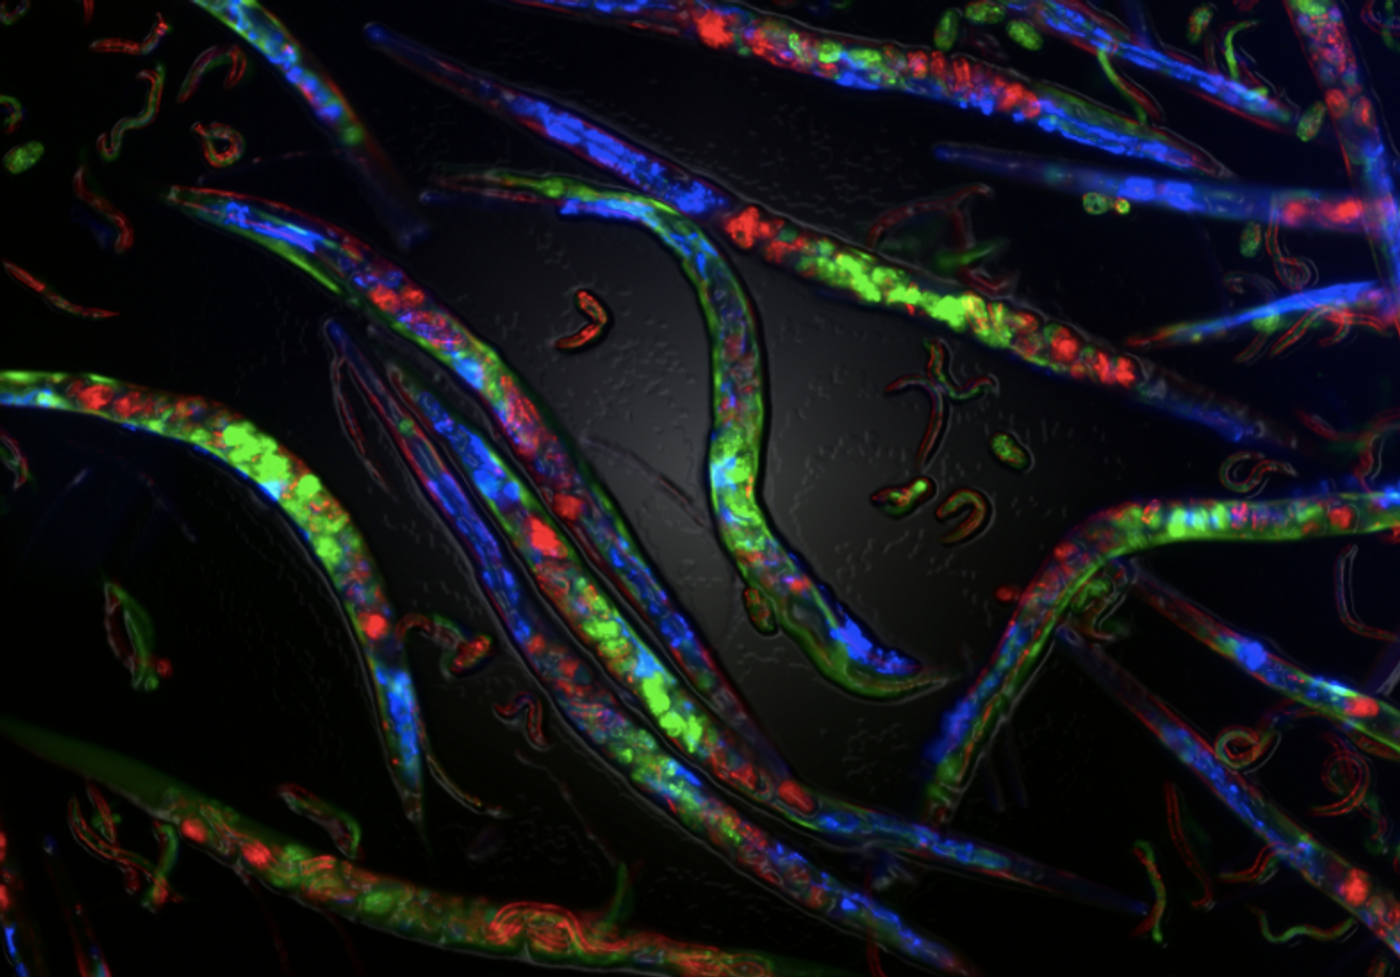 Adult C. elegans worms can be seen with embryos inside them. CREDIT Adam Klosin, CRG